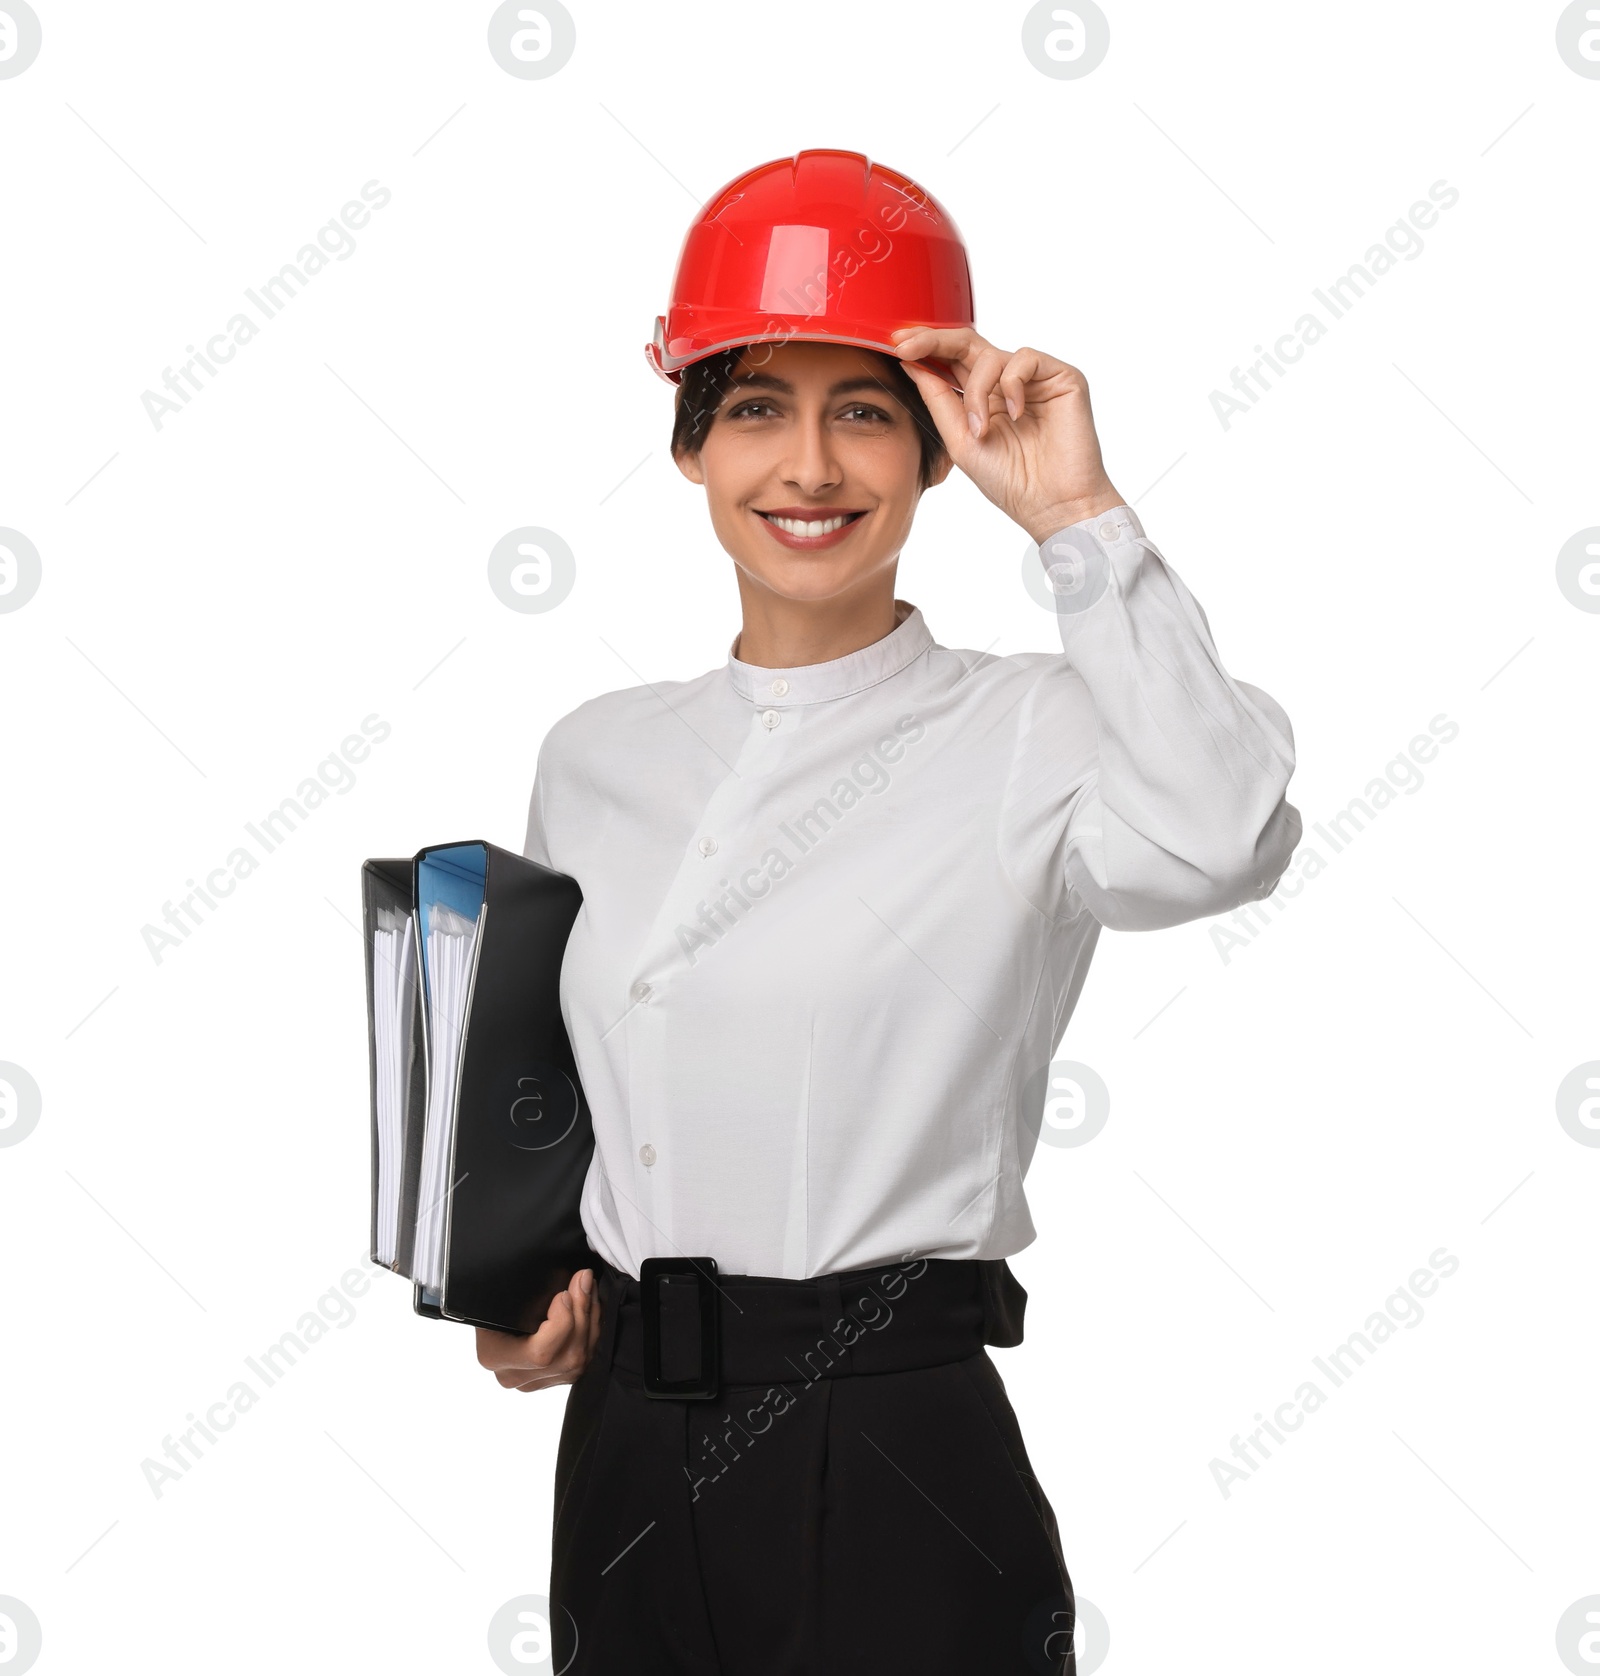 Photo of Architect with hard hat and folders on white background